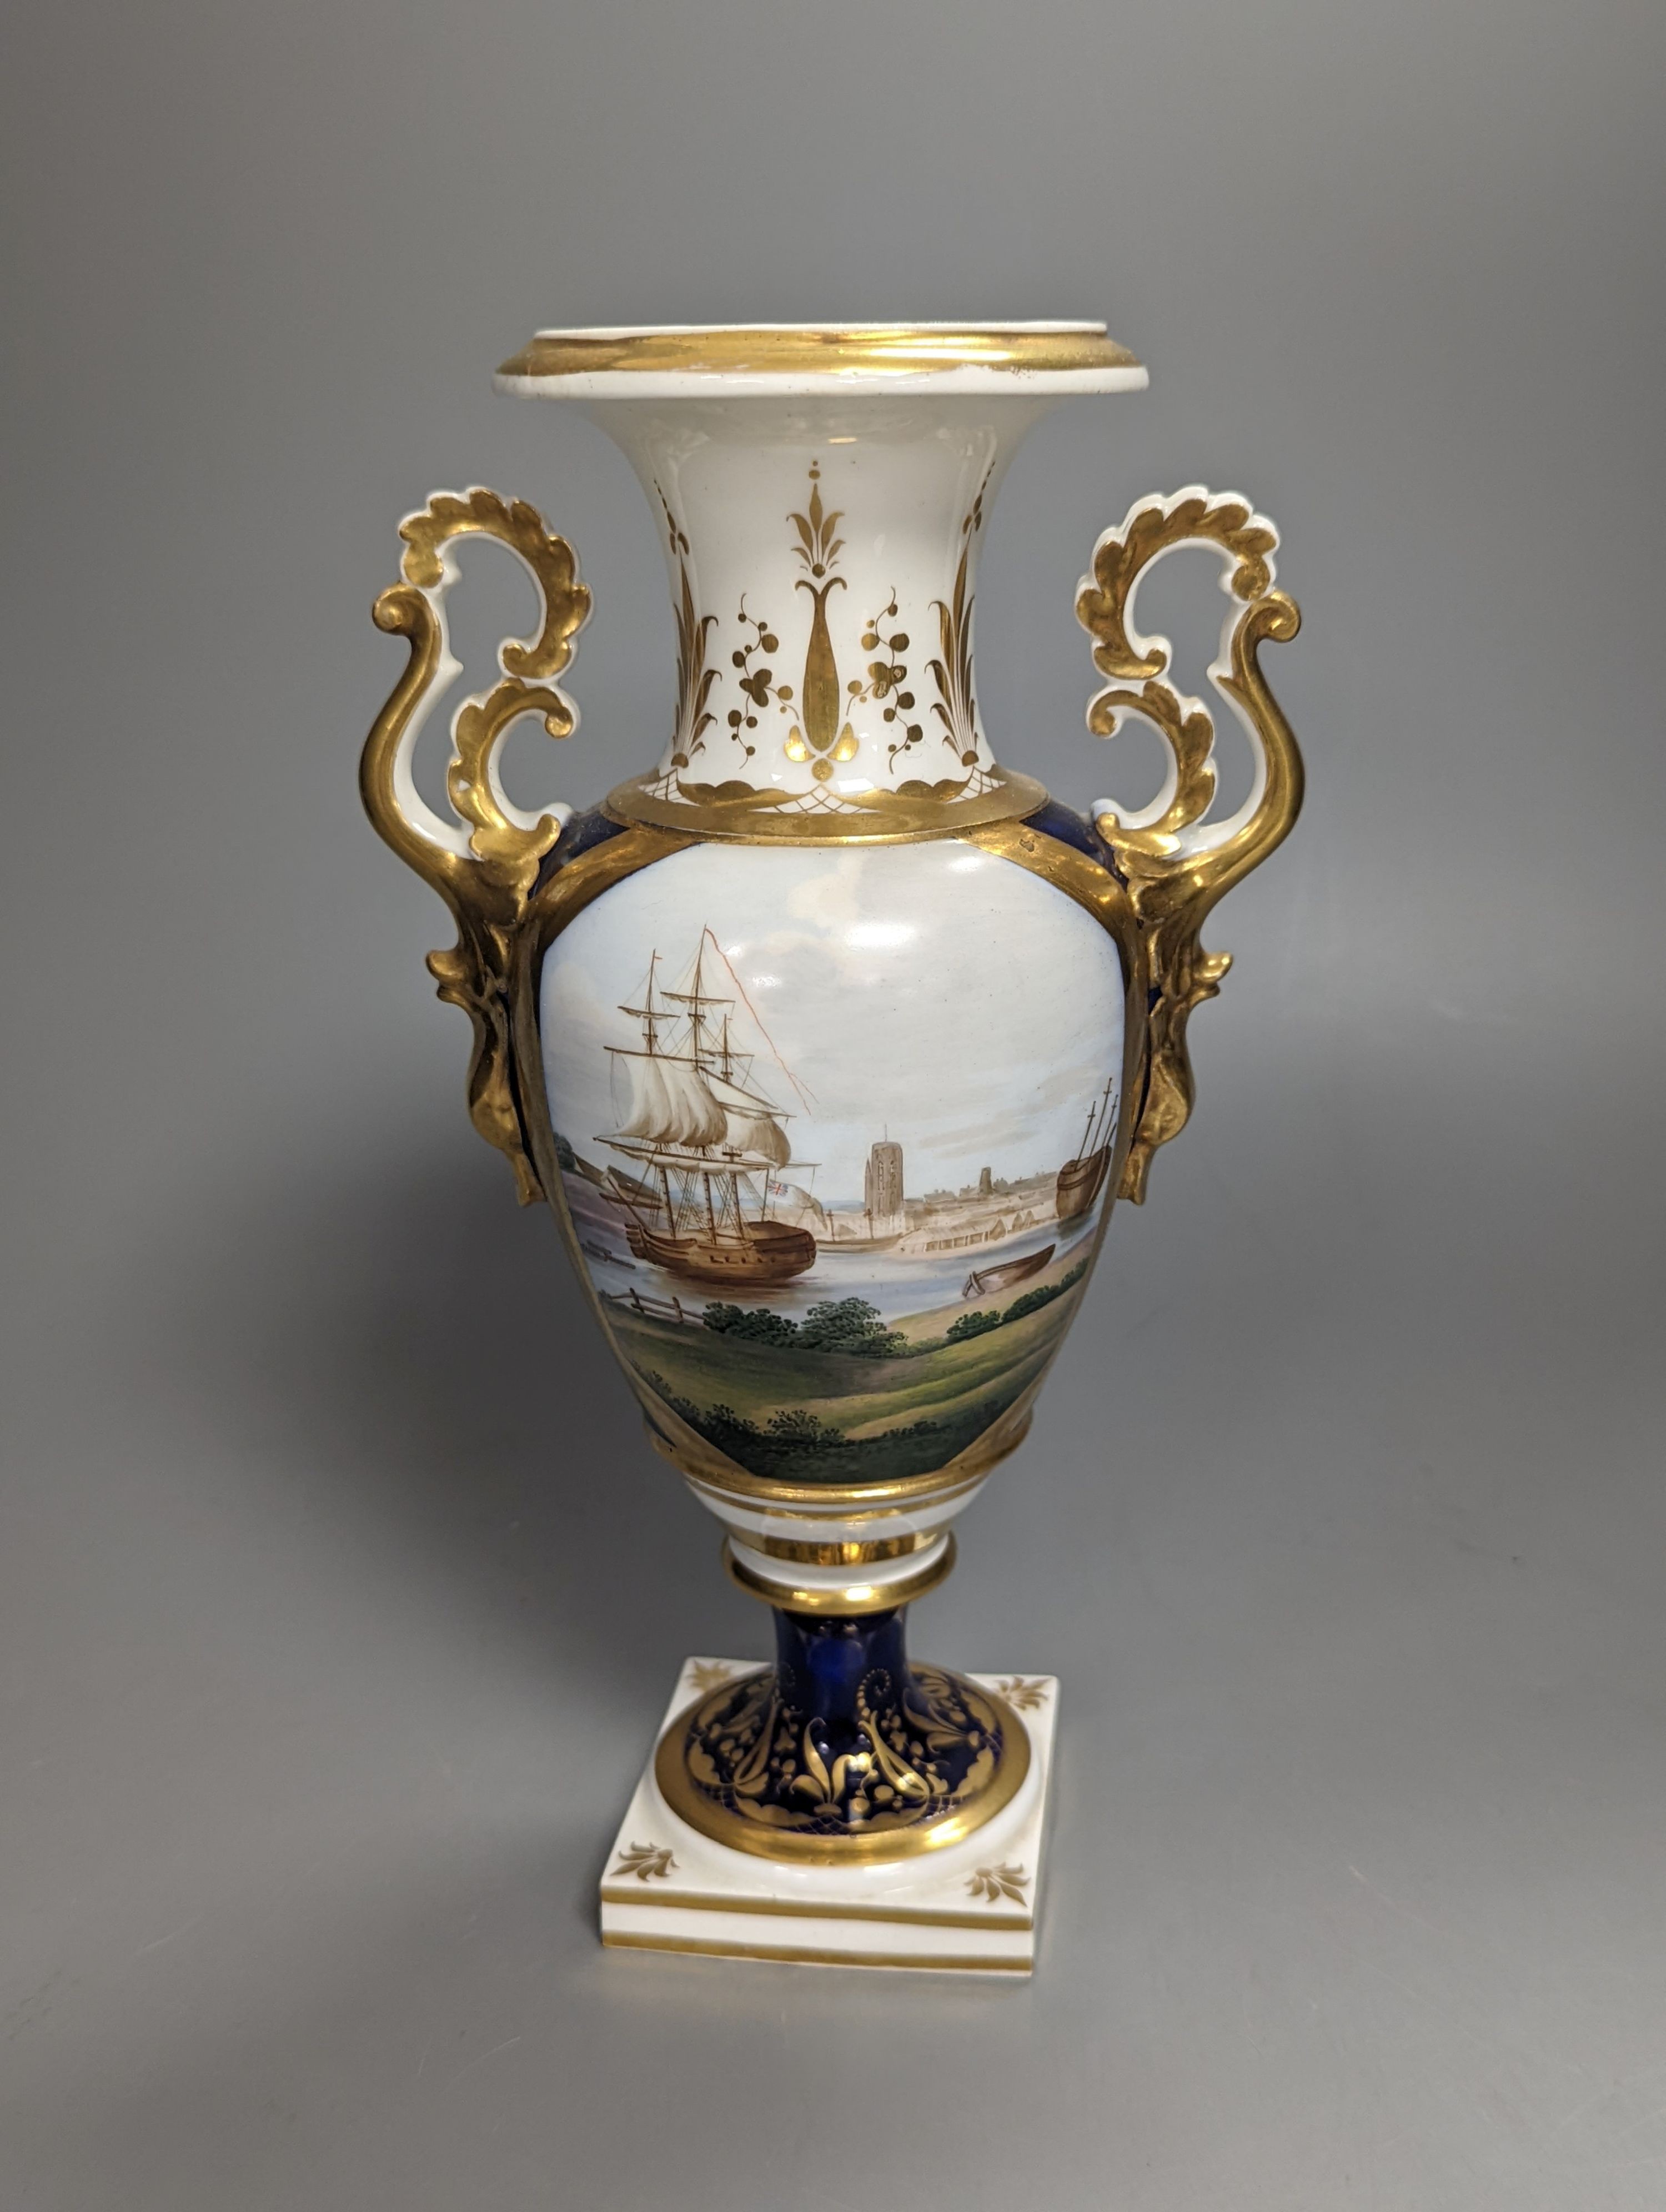 A Grainger Lee & Co. vase, painted with a view of Bristol Harbour and a sailing ship, c.1814-39, titled Bristol and Grainer in red script, height 23cm